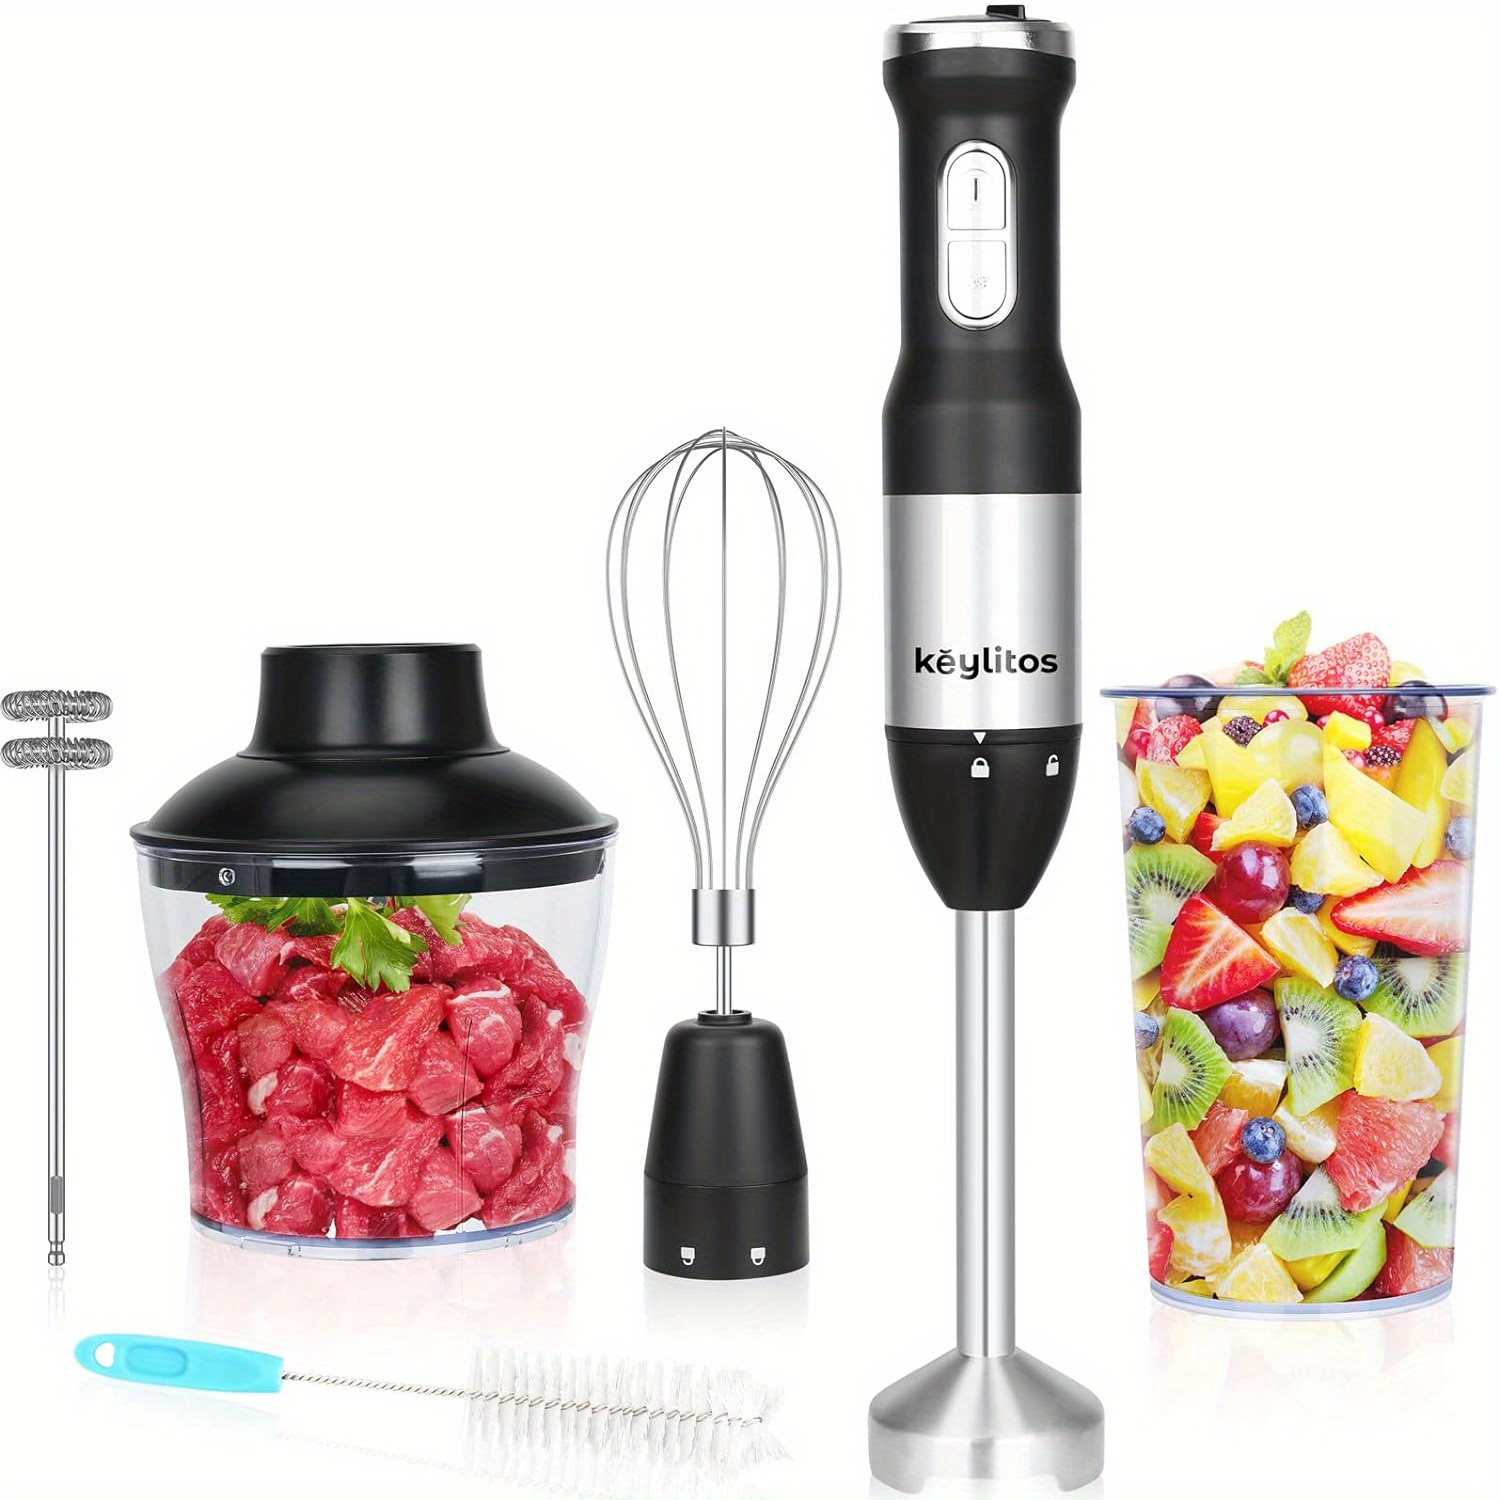 

5 In 1 Immersion Hand Blender Mixer, [upgraded] 1000w Handheld Stick Blender With 600ml Chopper, 800ml Beaker, Whisk And Milk Frother For Smoothie, Baby Food, Sauces Red, Puree, Soup (black)